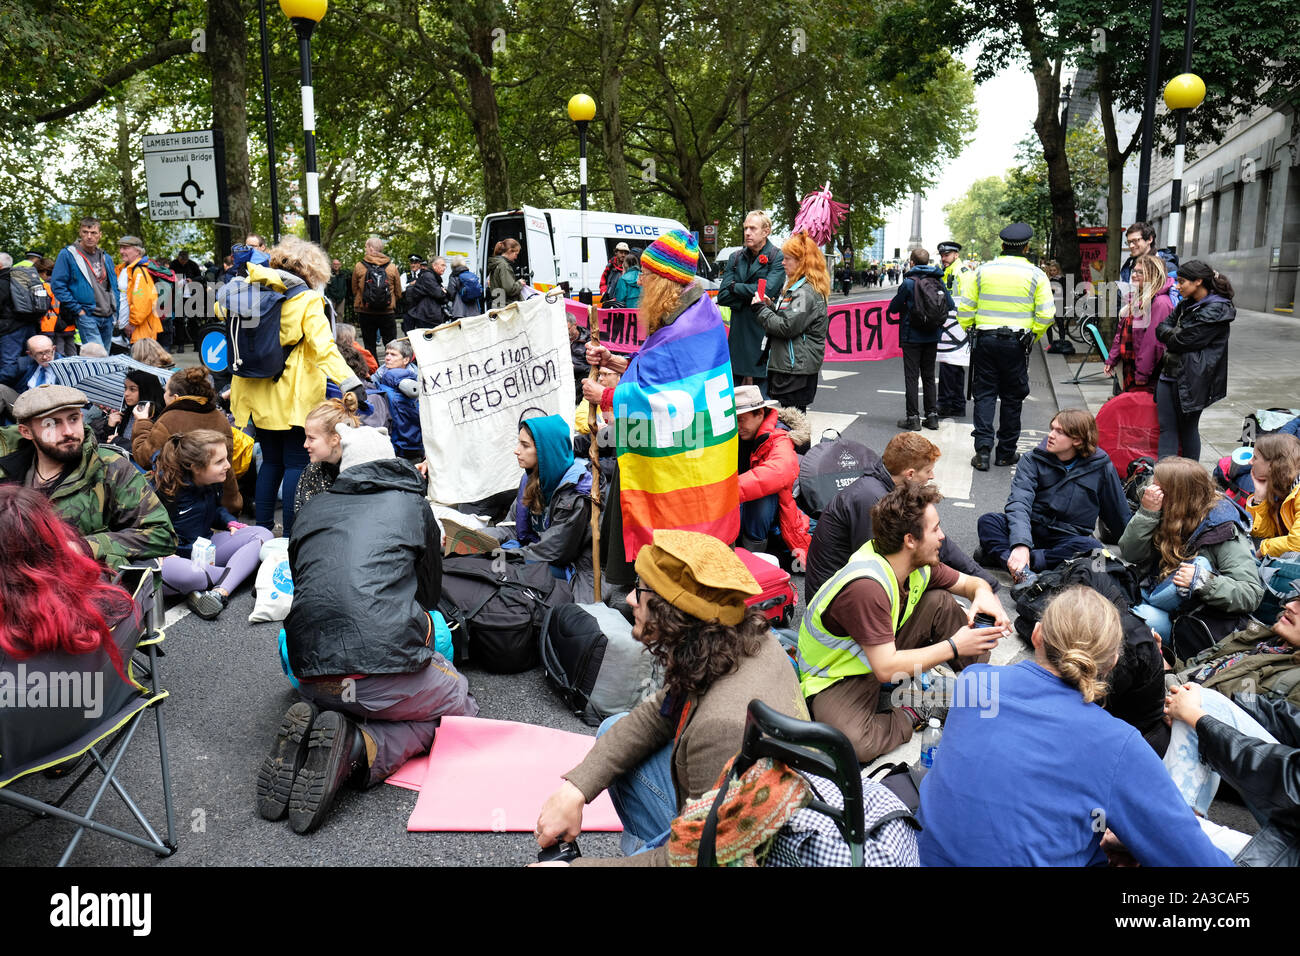 Westminster, London, UK - Monday 7th October 2019 - Extinction Rebellion XR climate protesters block roads around Westminster - shown here a group of XR protesters blocking Millbank near Parliament. Photo Steven May / Alamy Live News Stock Photo